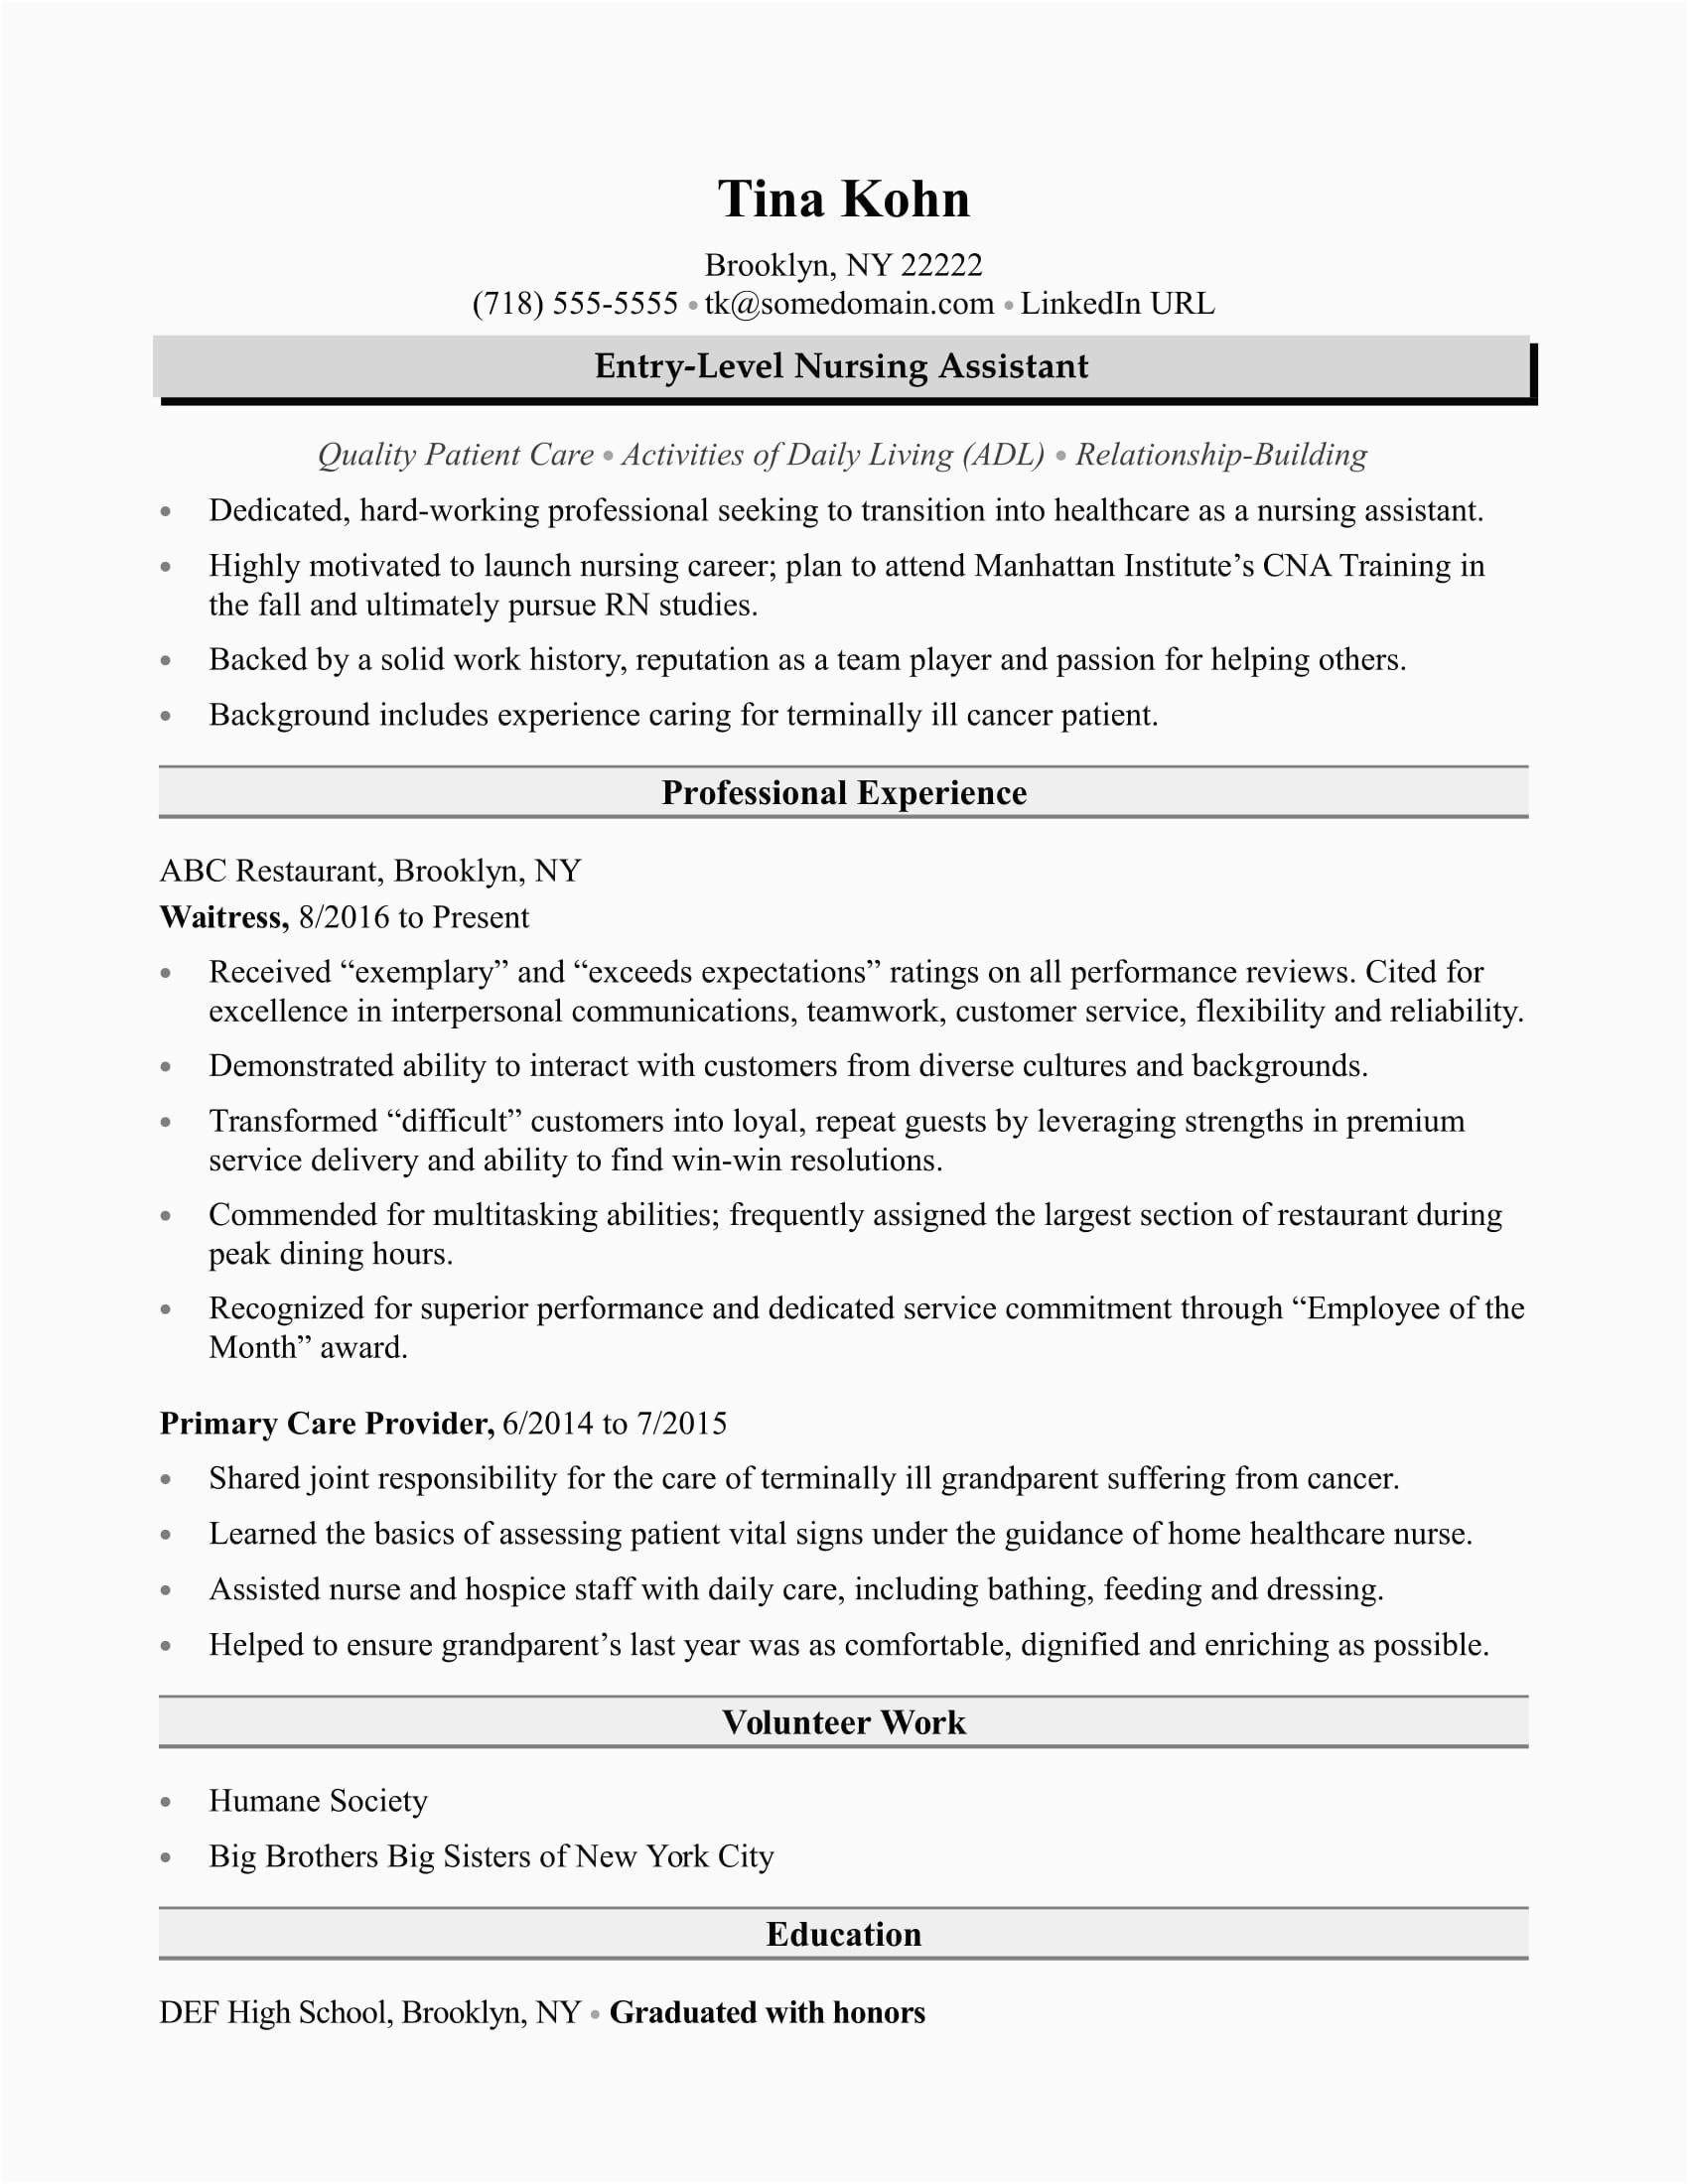 New Grad Rn Resume with No Experience Sample New Grad Rn Resume with No Experience Template Addictionary